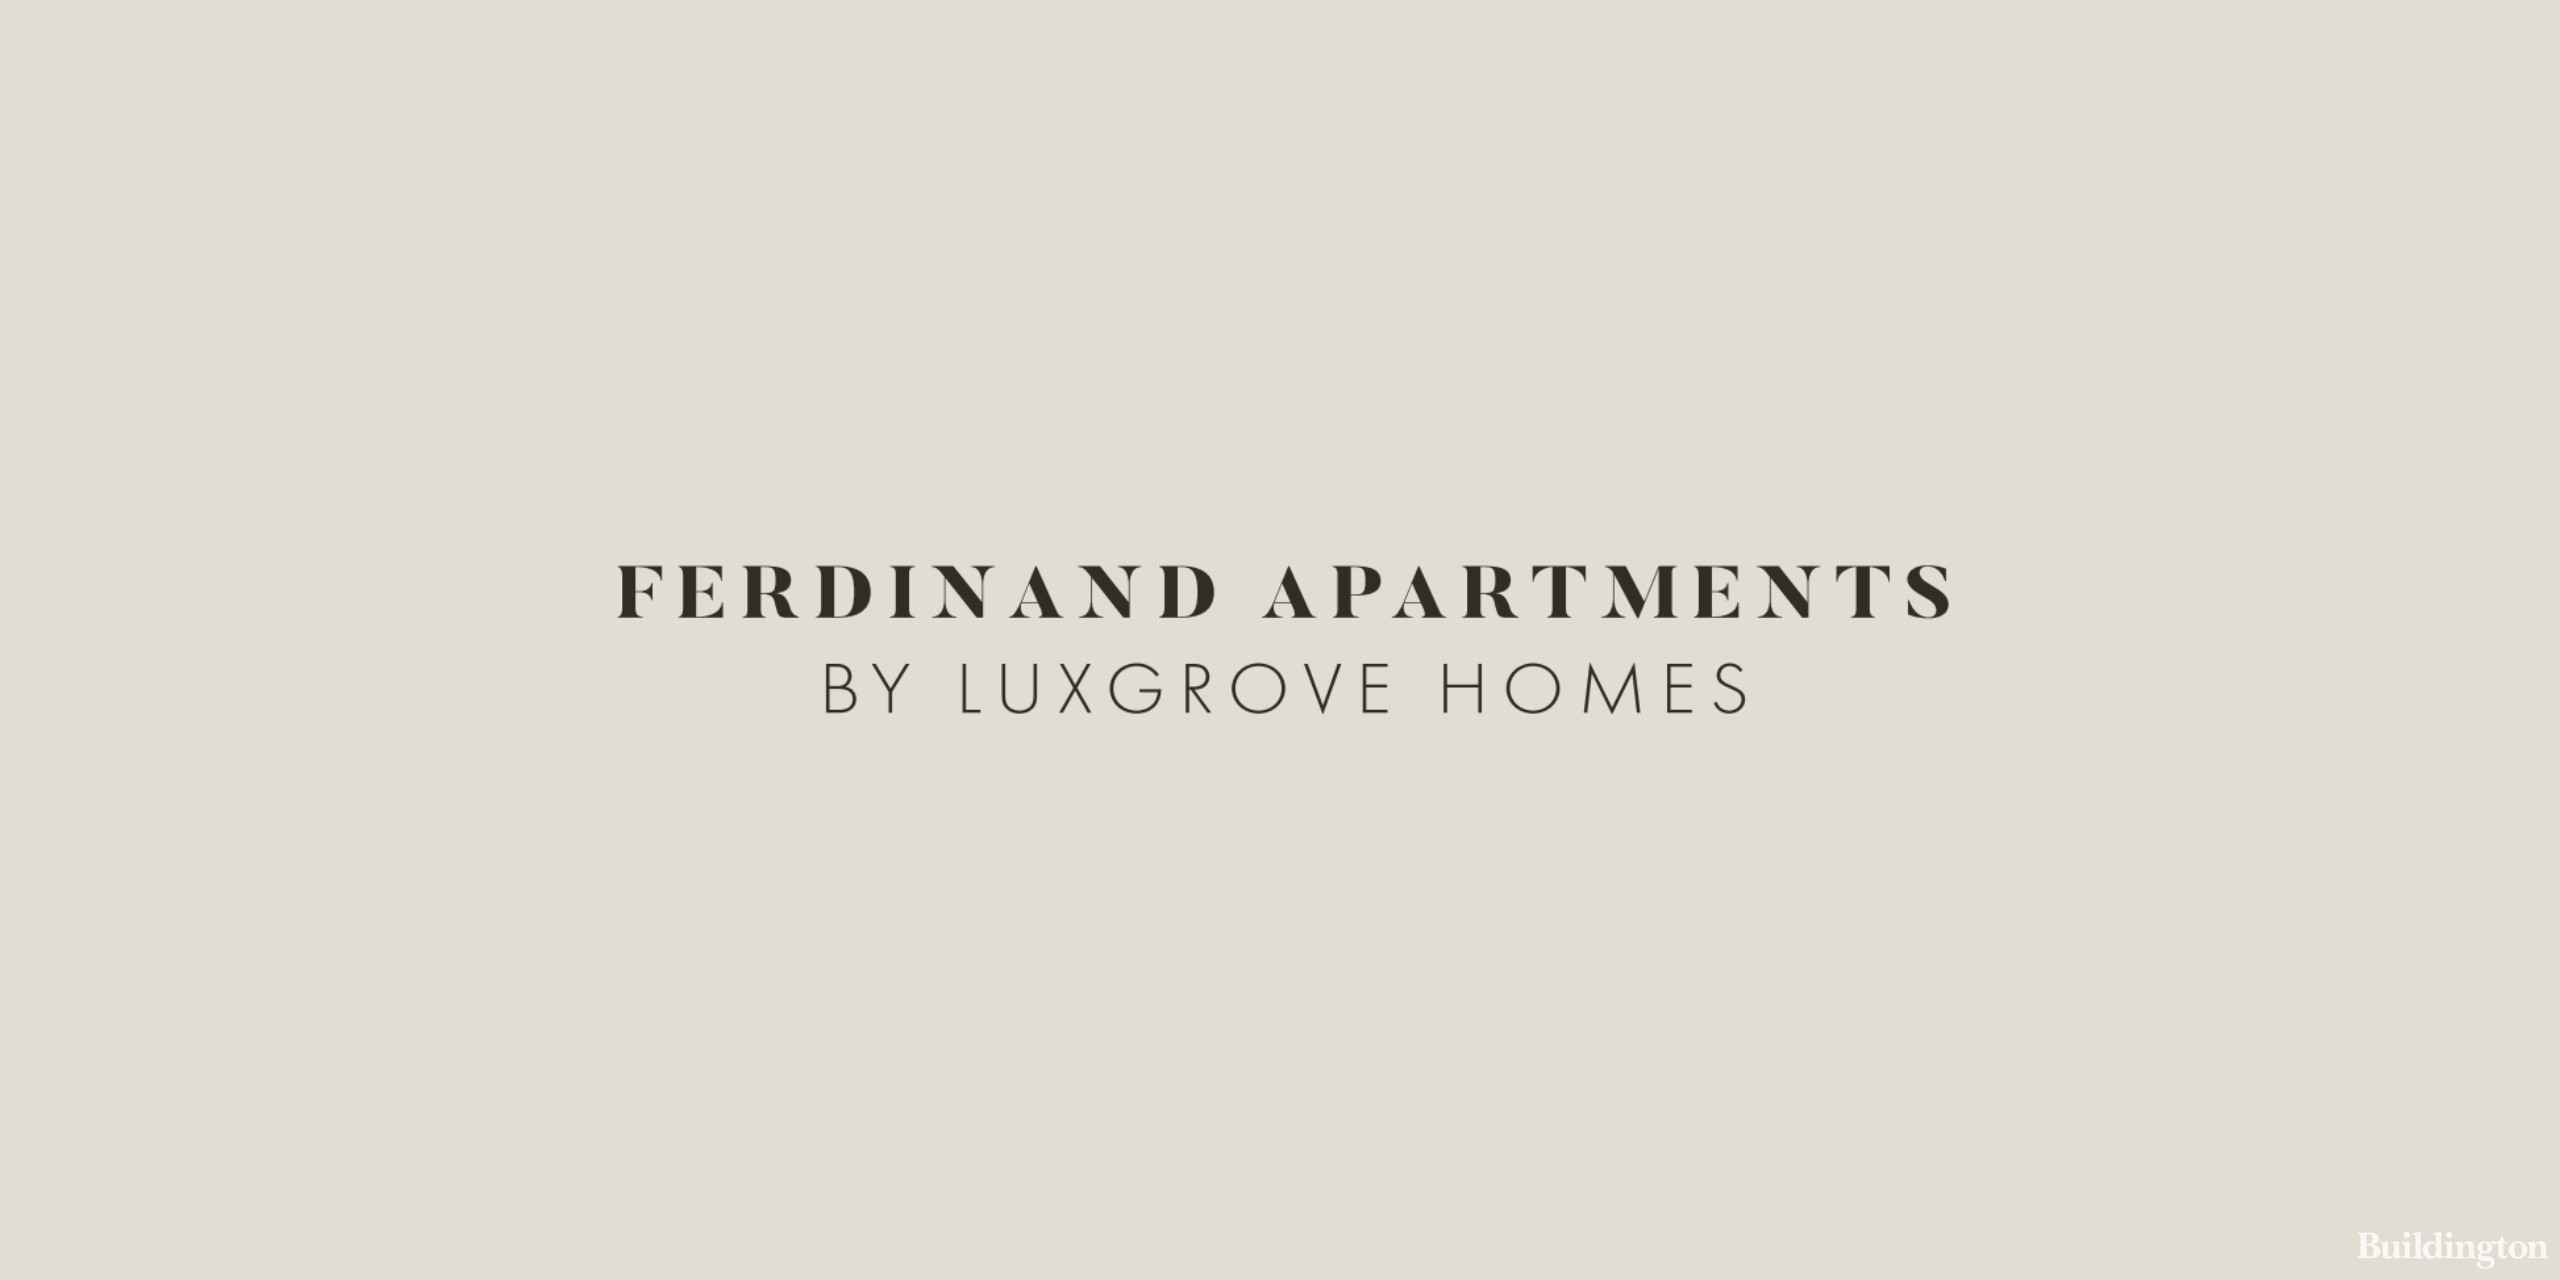 Ferdinand Apartments development logo cover. The logo and website design designed by Ademchic